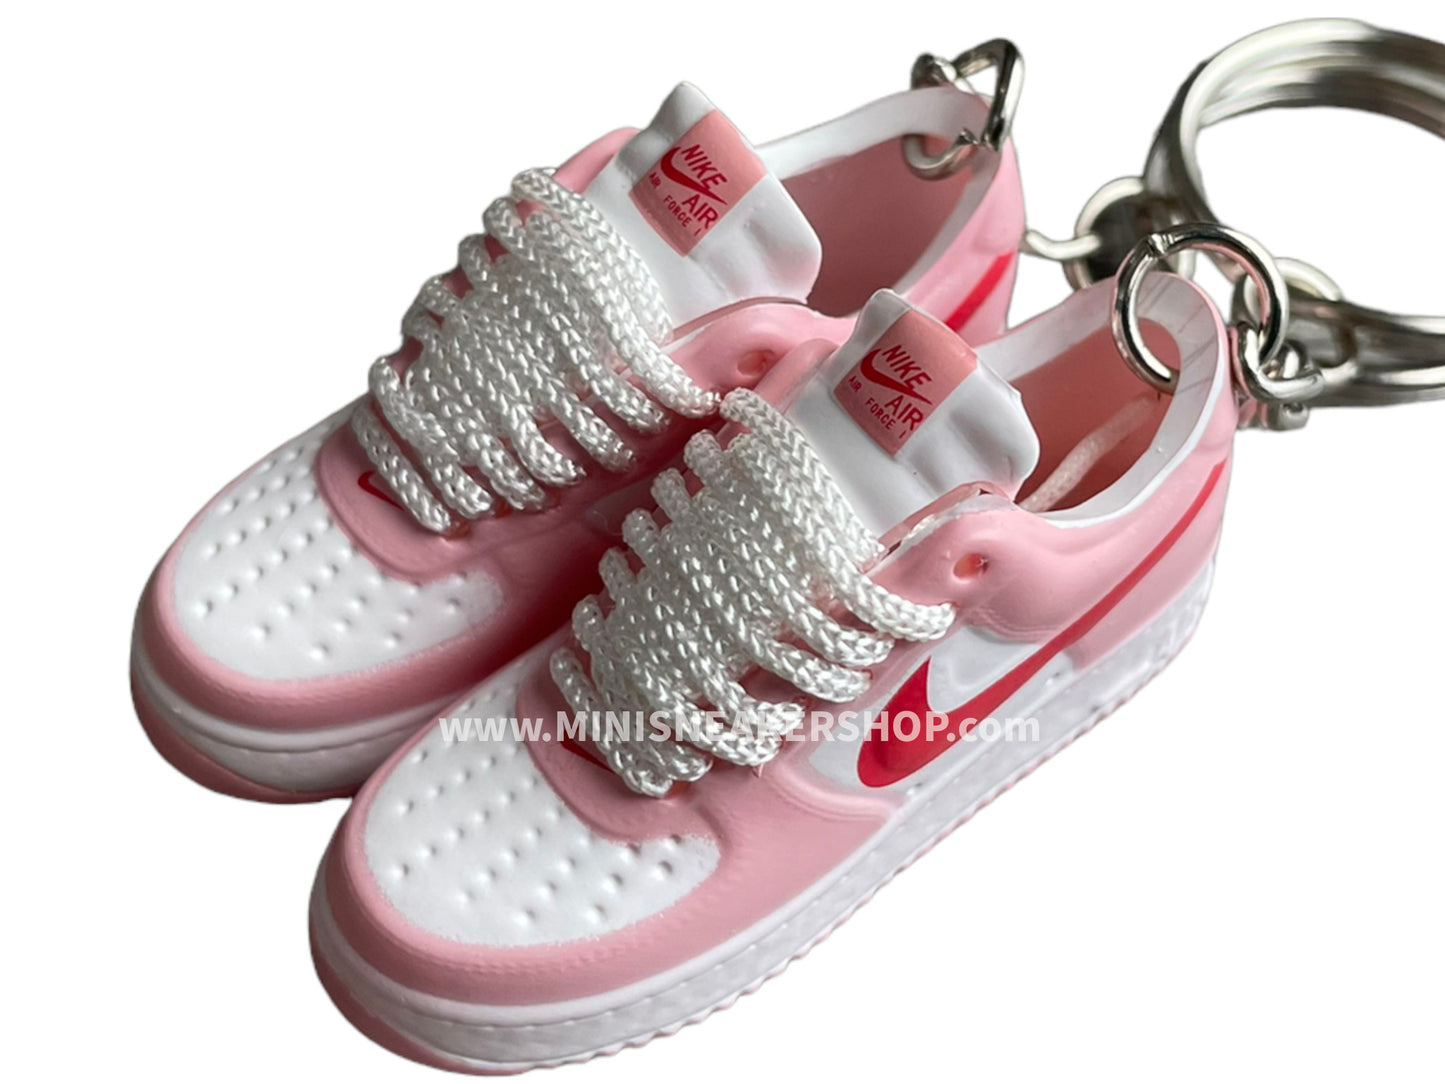 Mini 3D sneaker keychains Air Force 1 Valentine's Day